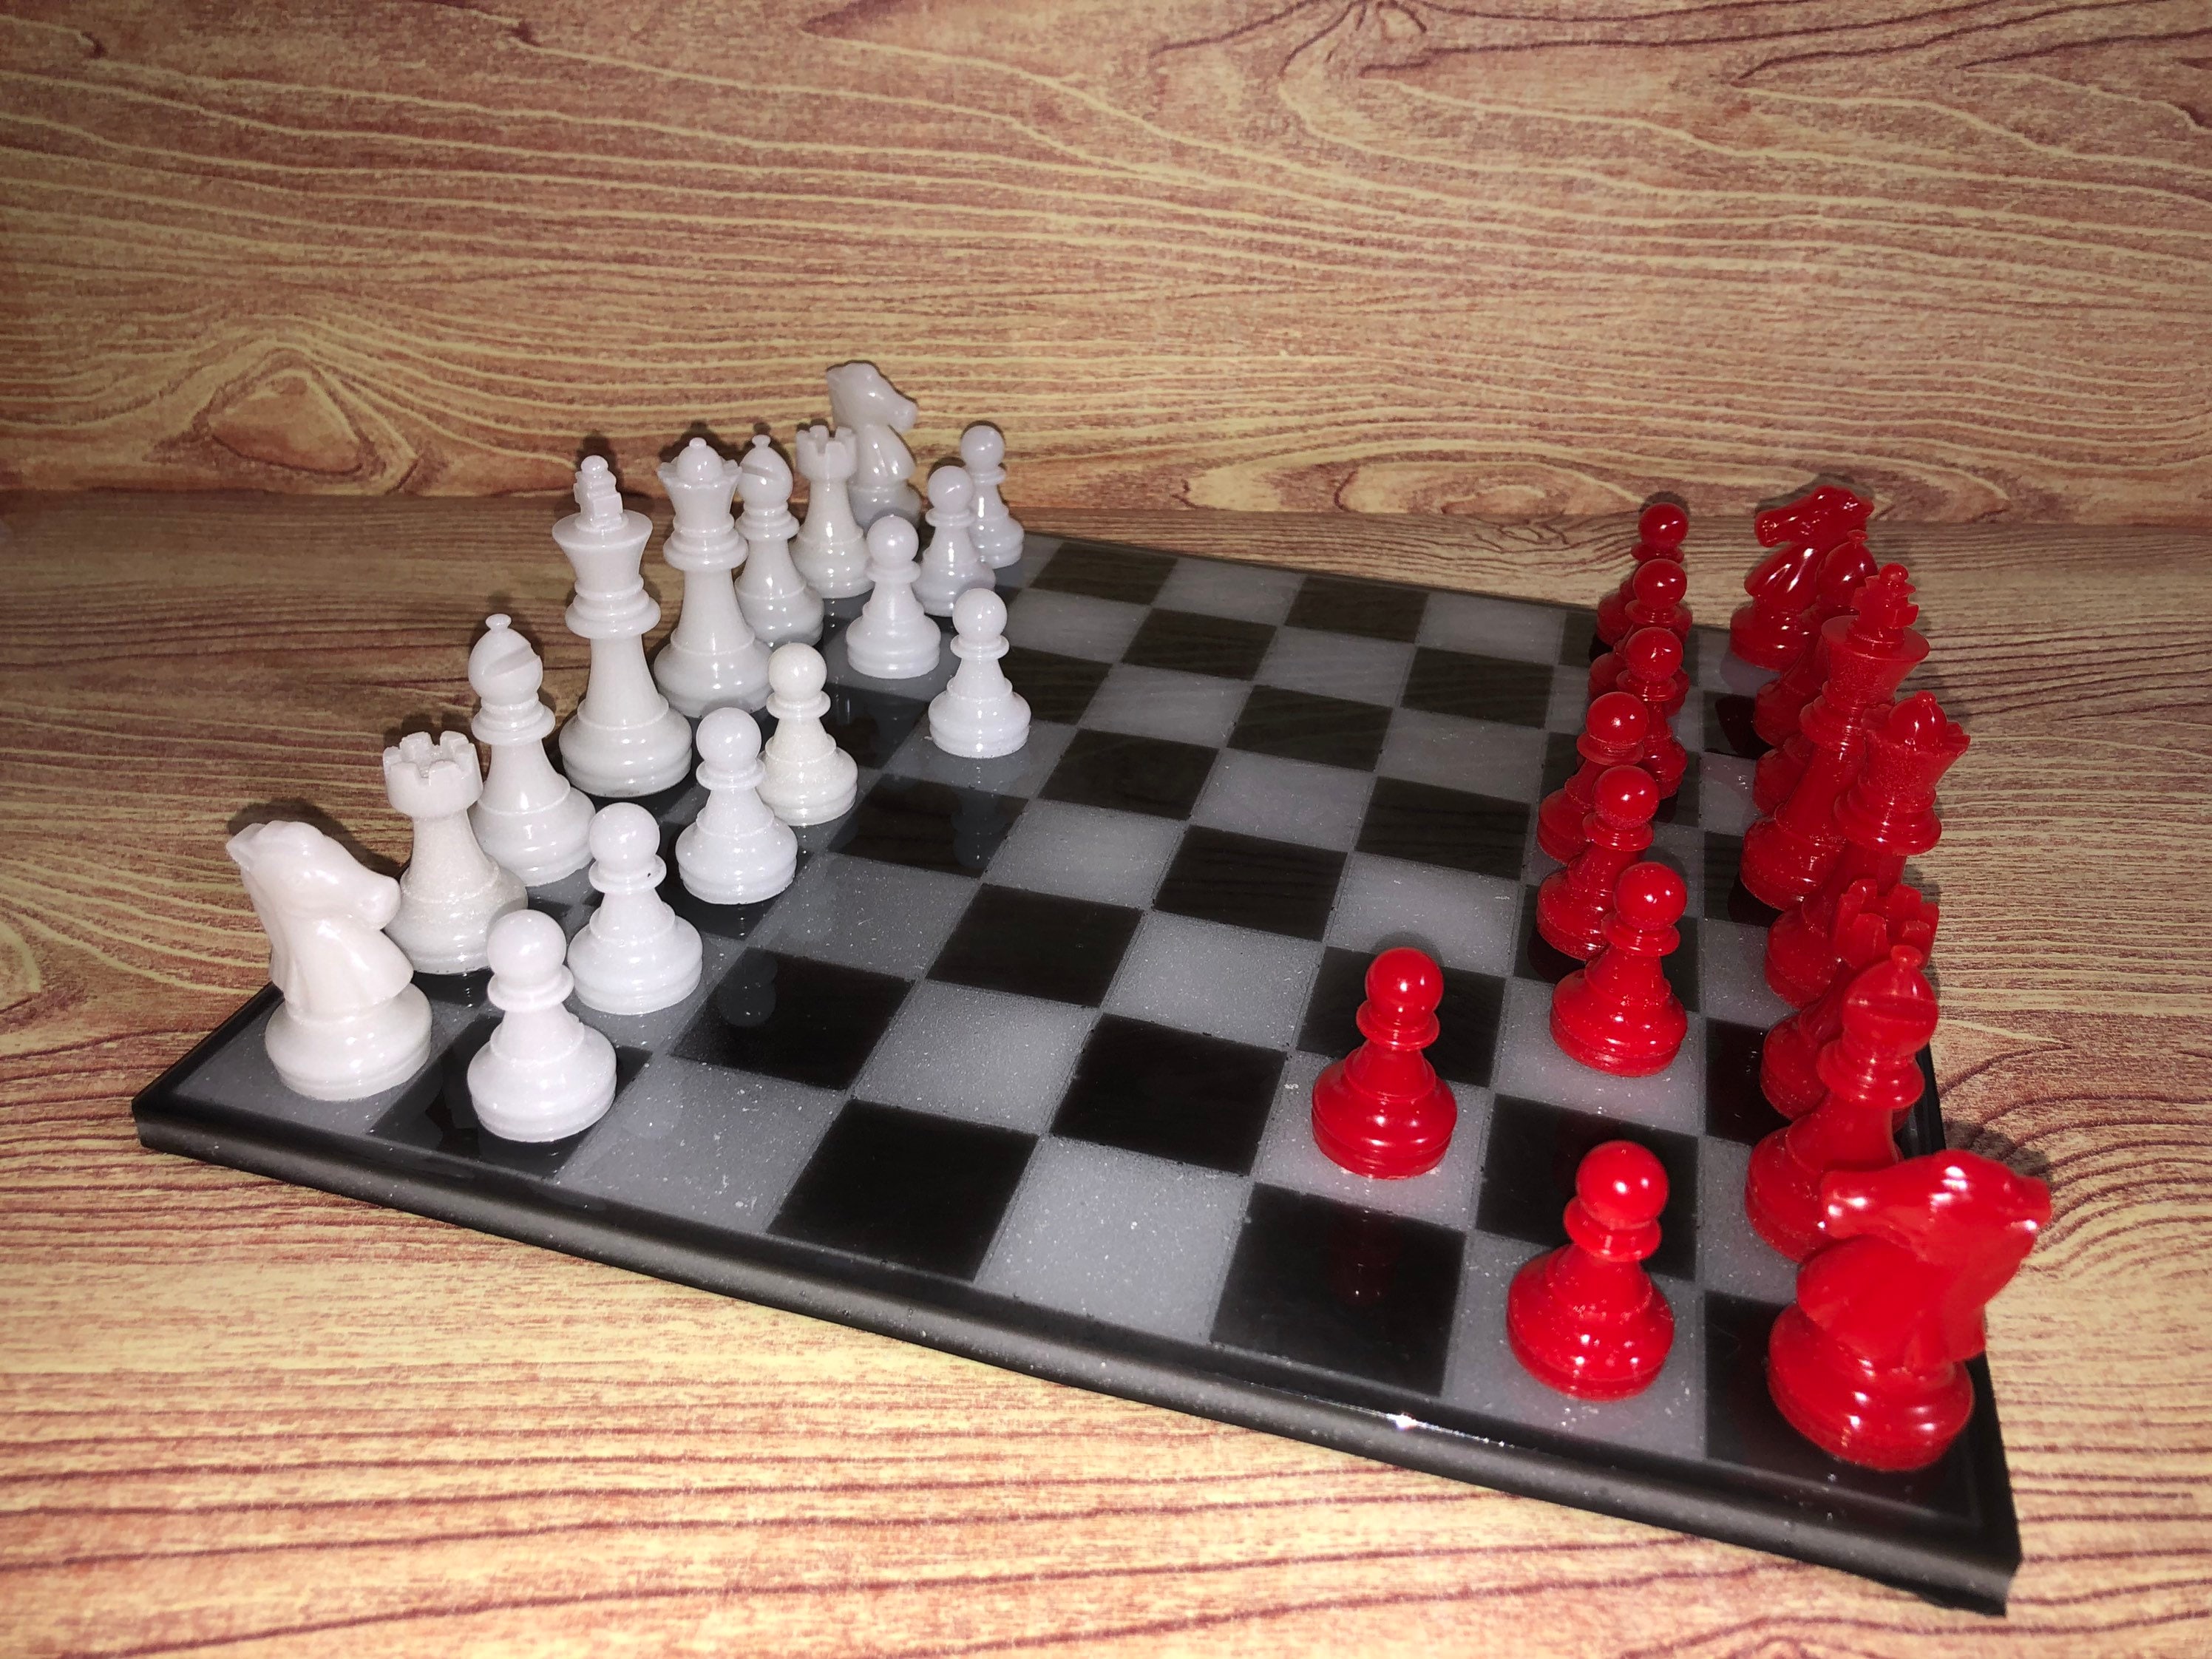 Custom Resin Chess and Checkers sets